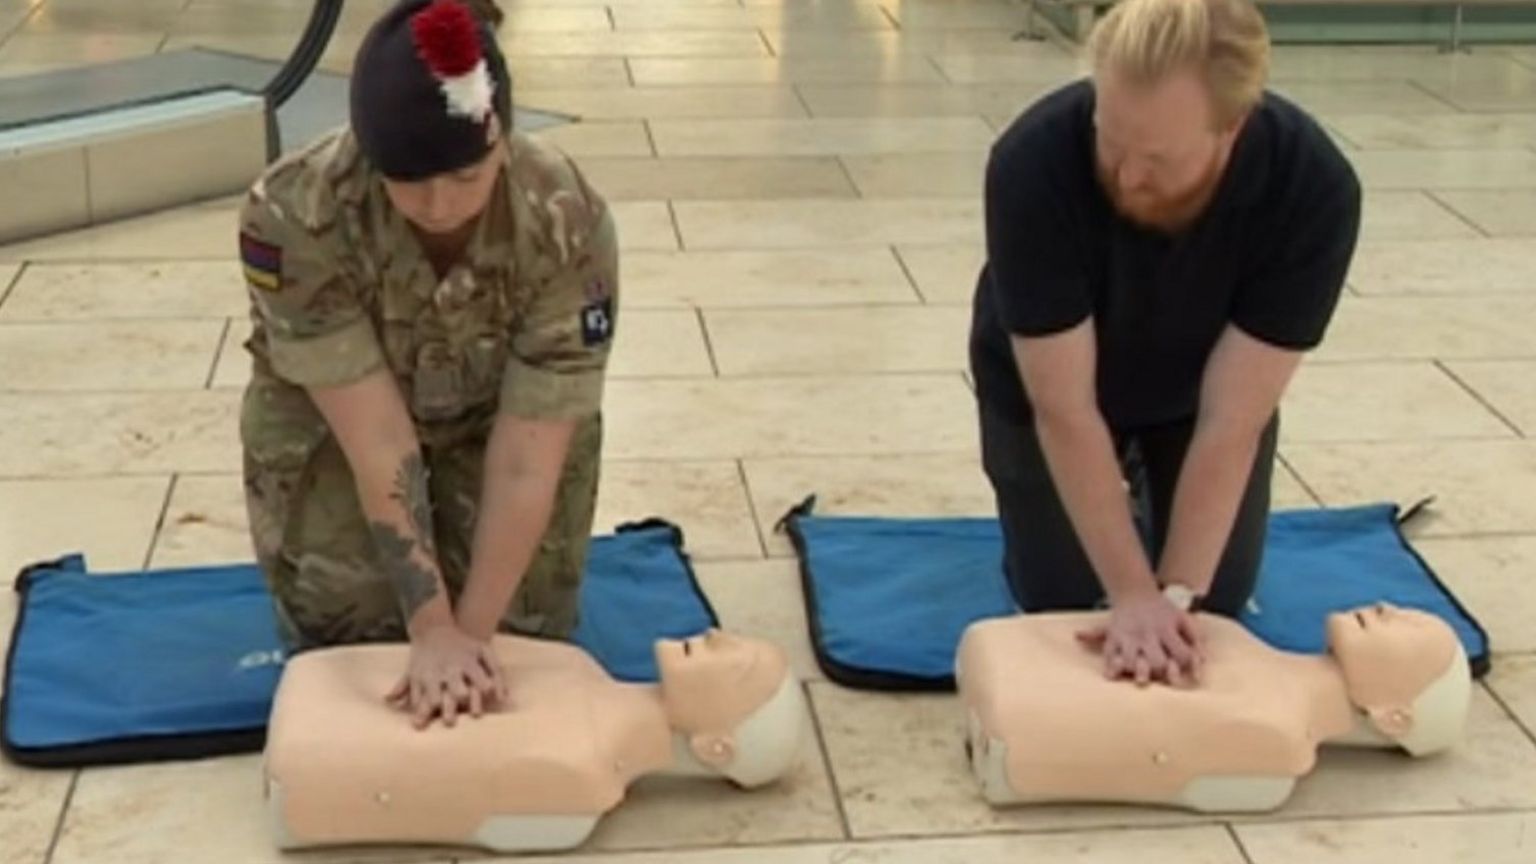 CPR demonstration with dummies